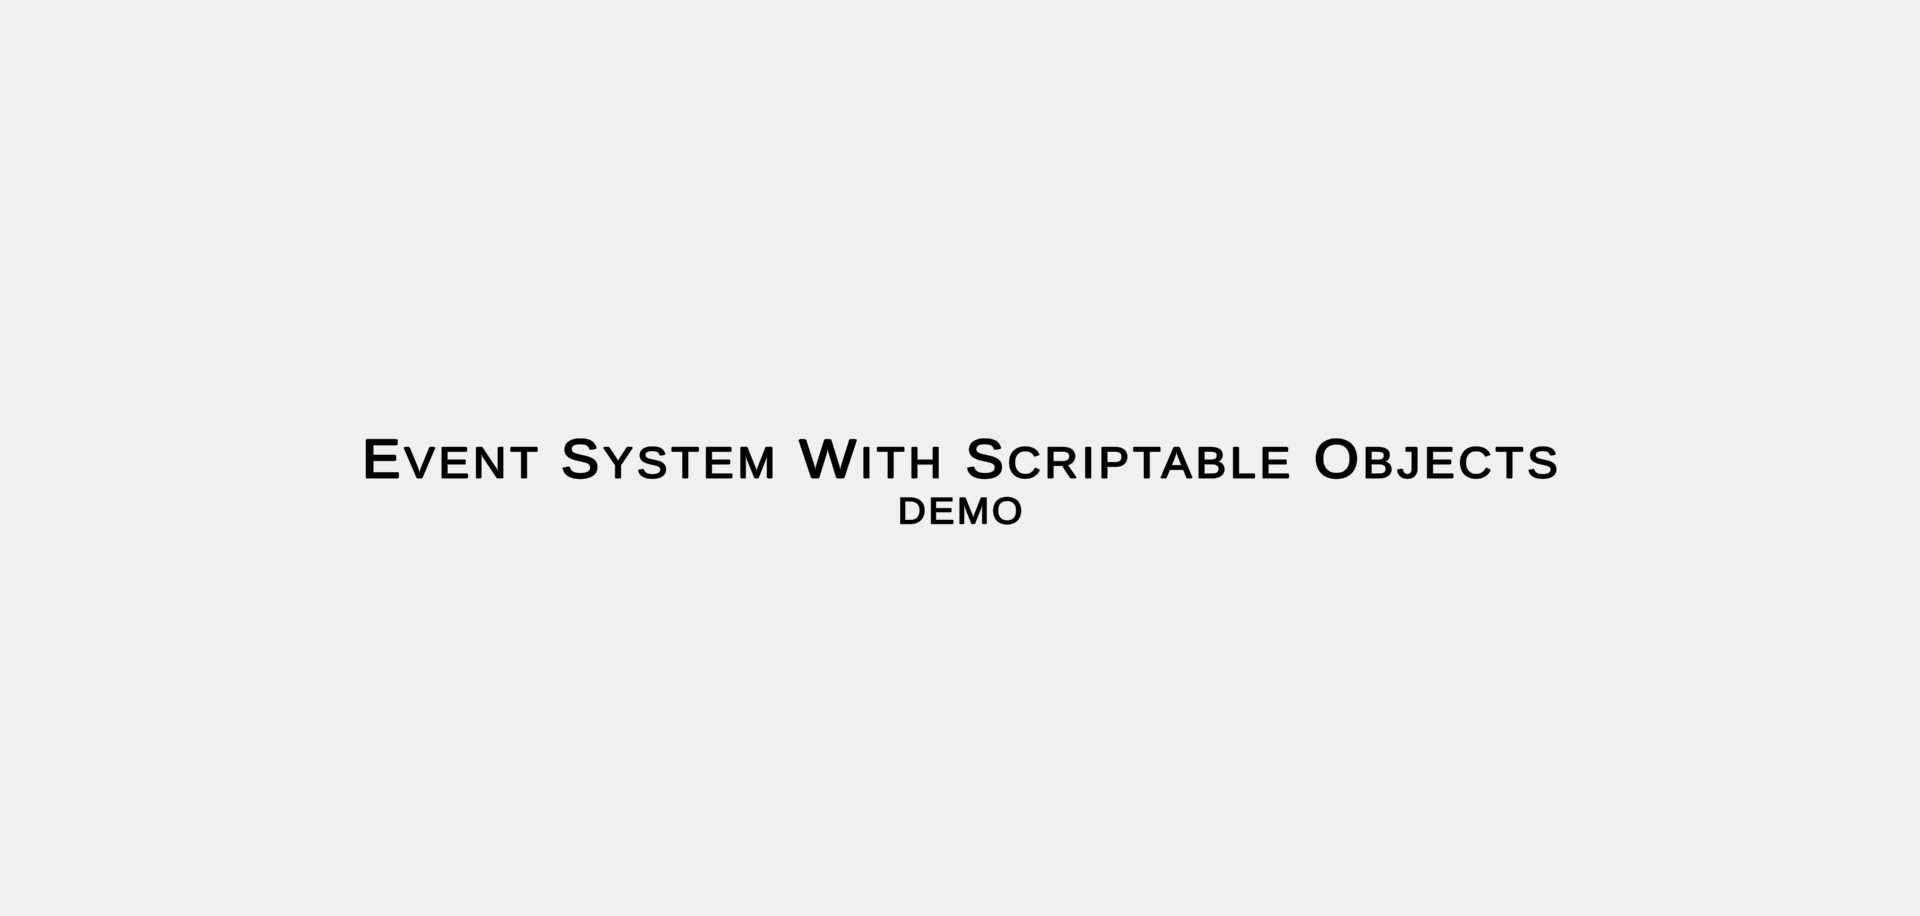 DEMO: Event System With Scriptable Objects